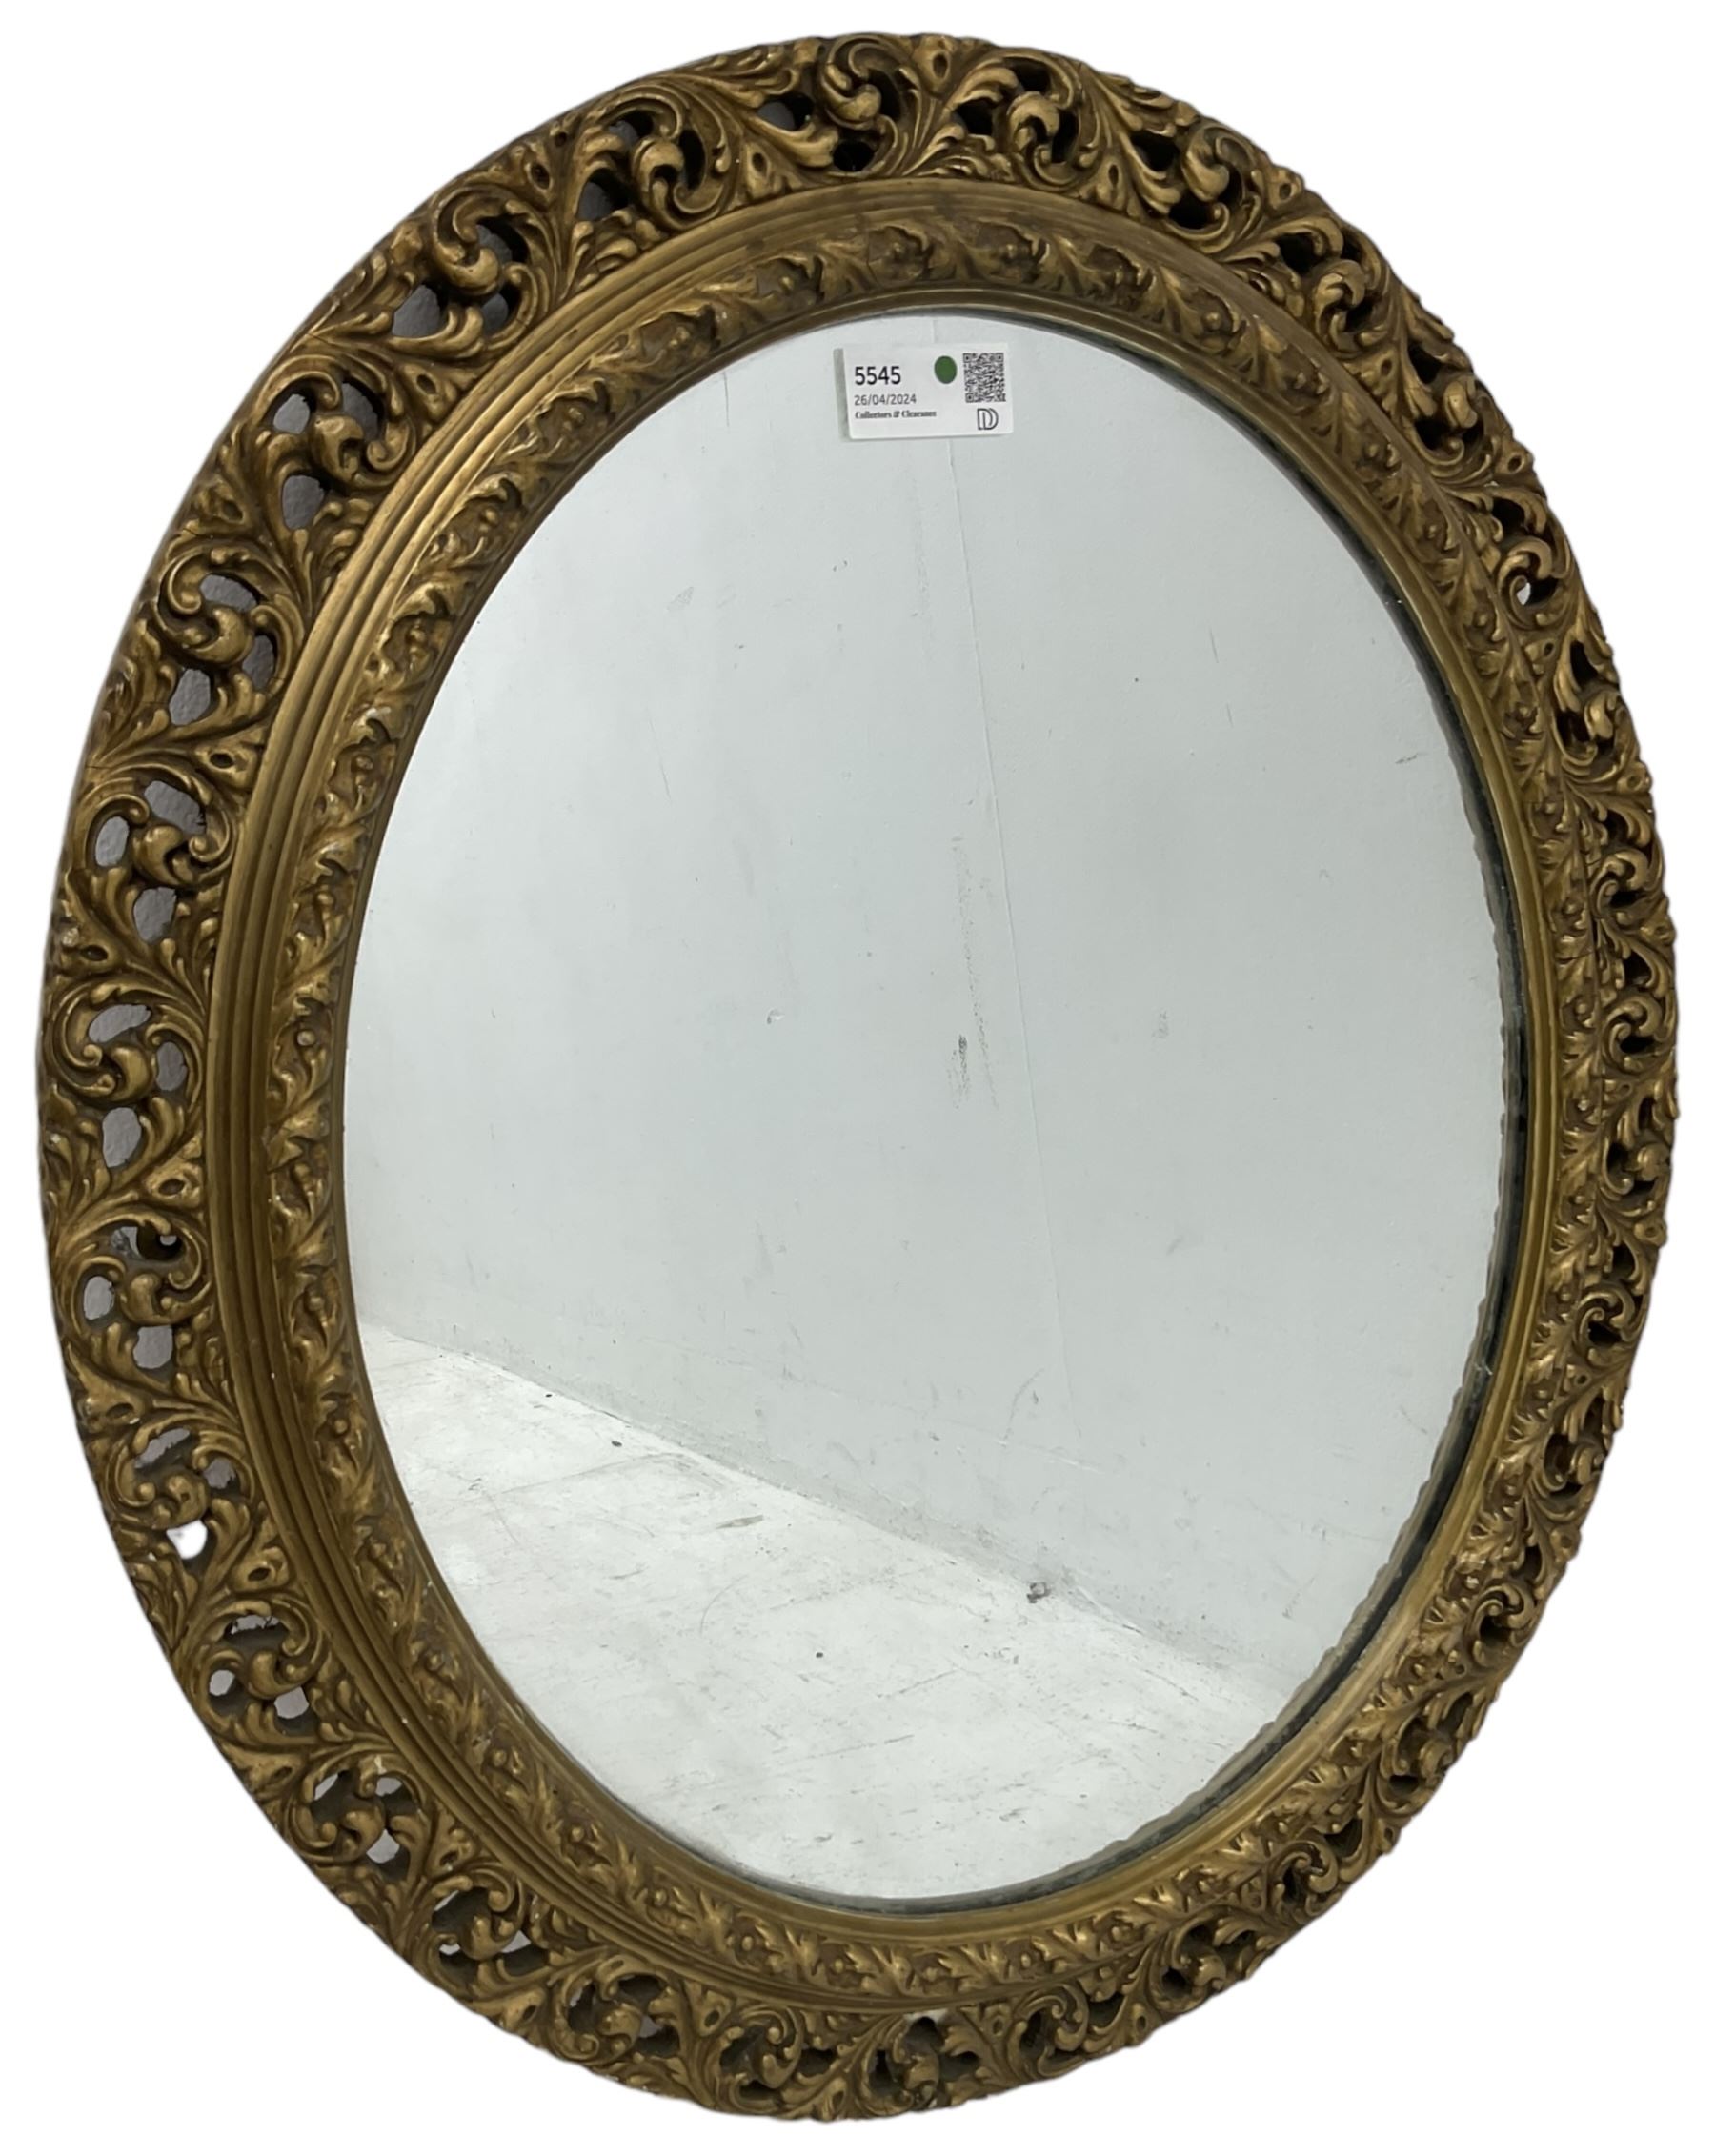 Mid-20th century gilt wood and gesso wall mirror - Image 4 of 4